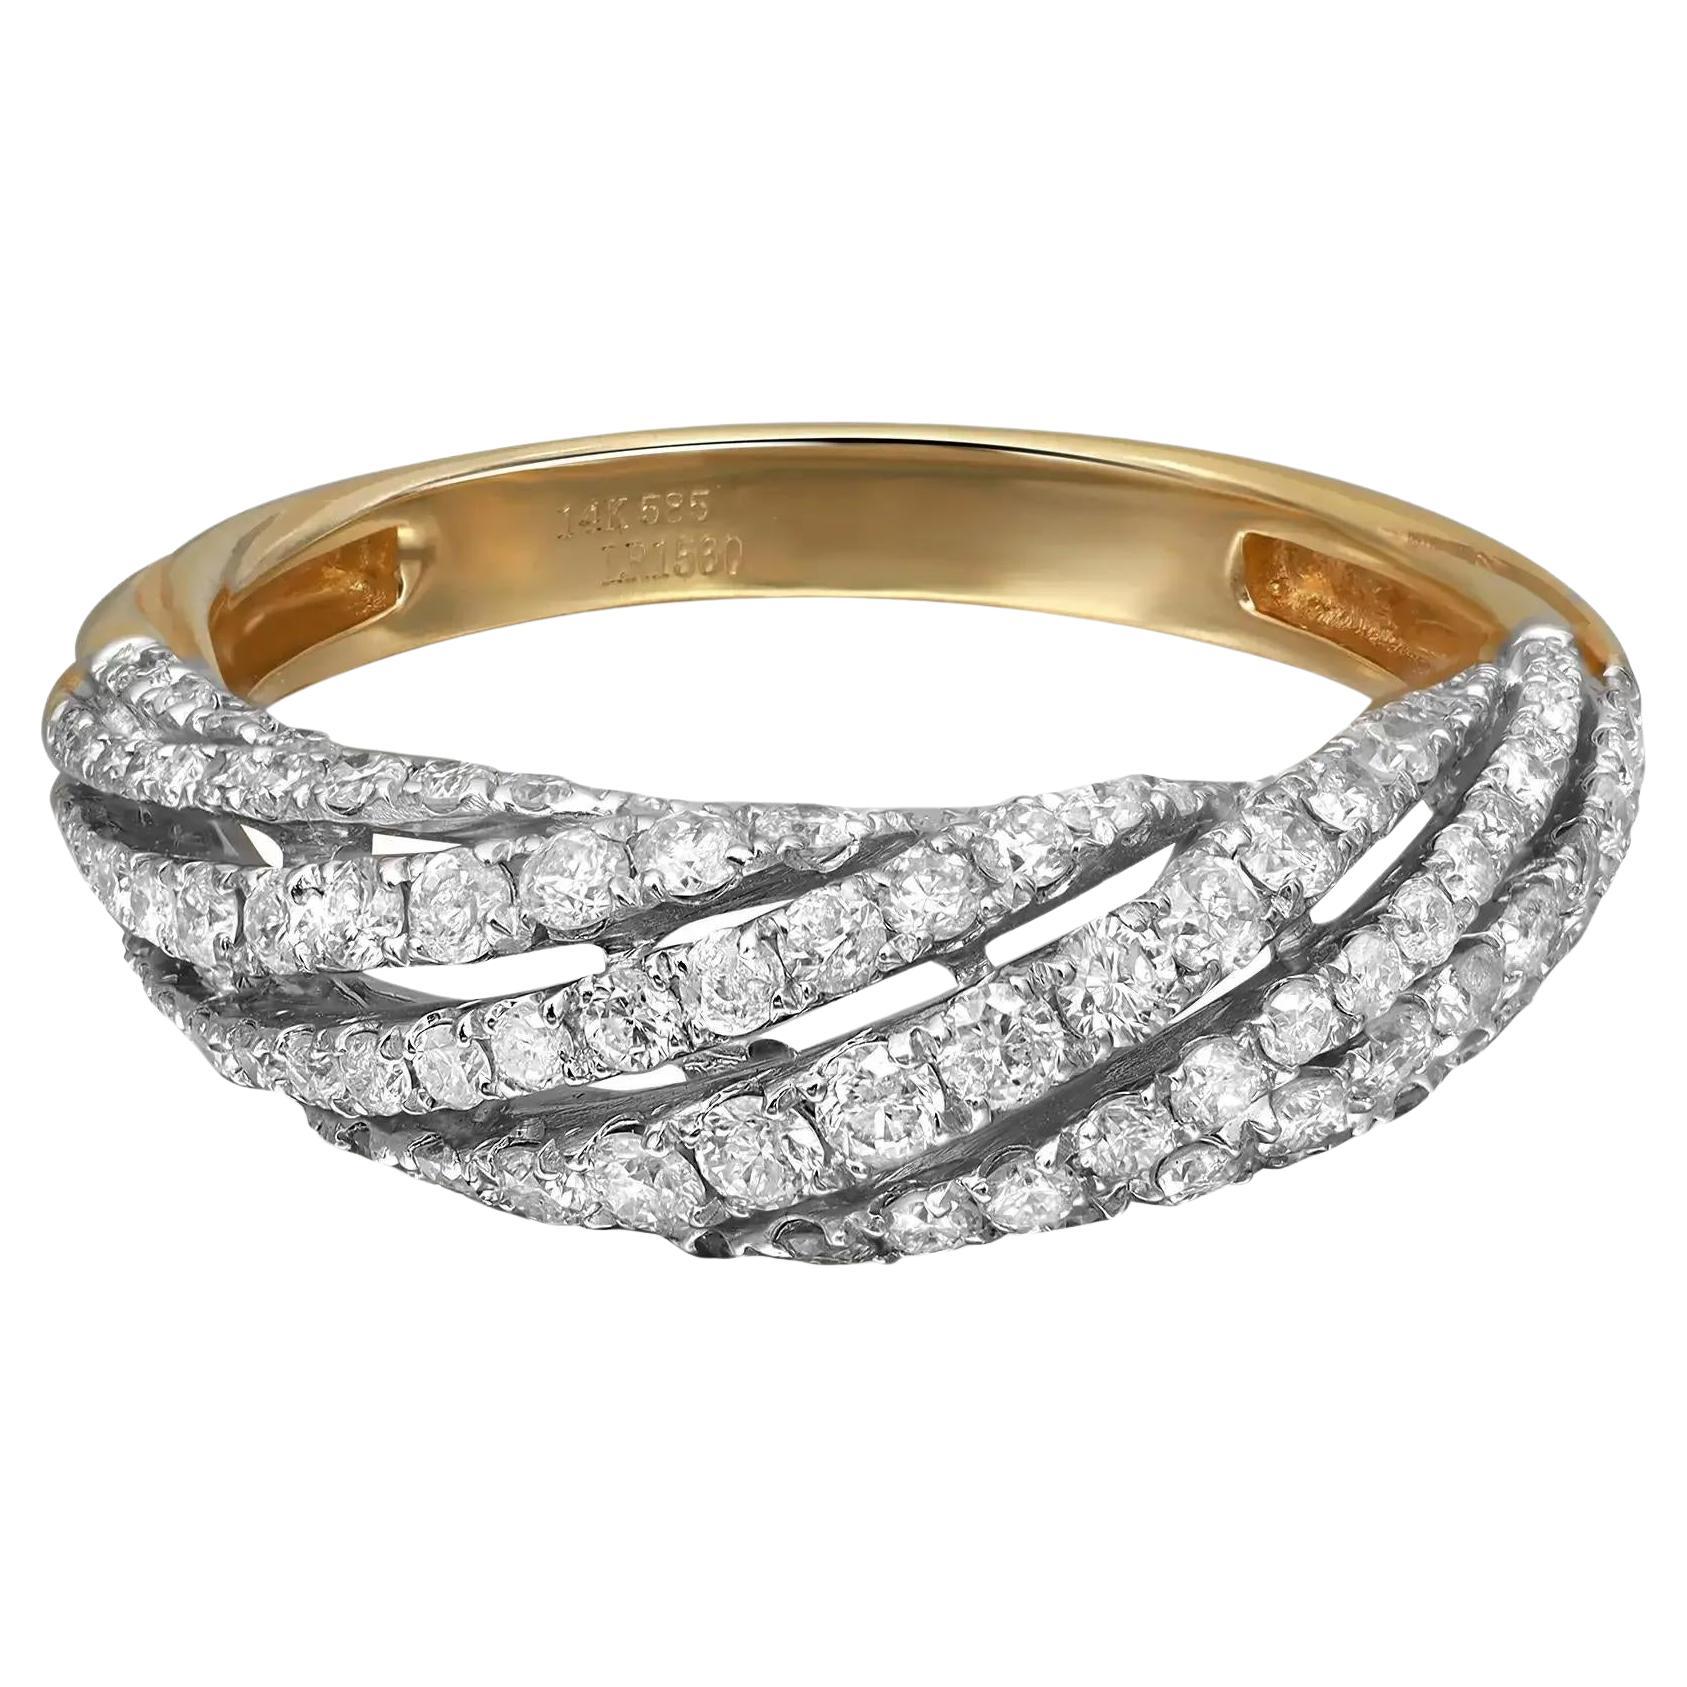 1.24cttw Prong Set Round Diamond Ladies Cocktail Ring 14k Yellow Gold For Sale